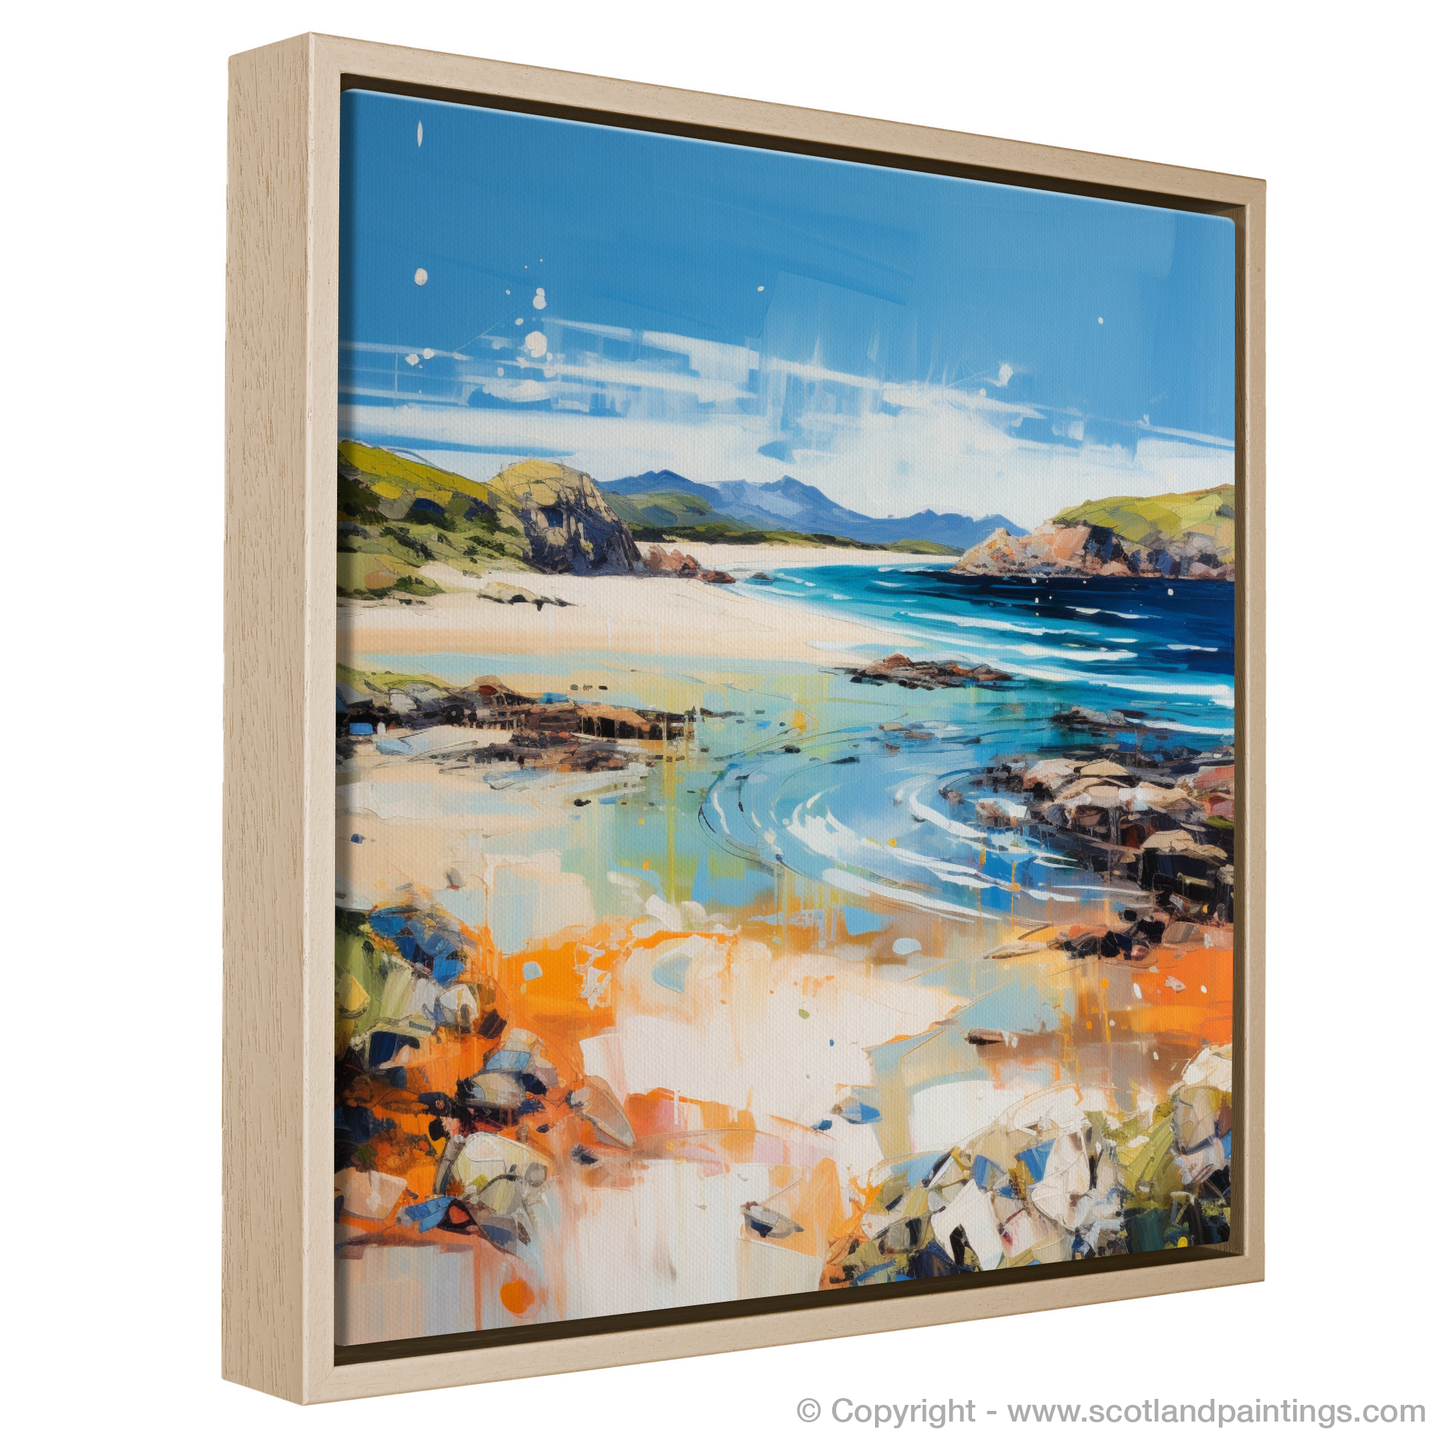 Painting and Art Print of Camusdarach Beach, Arisaig entitled "Dance of Light and Colour: An Expressionist Ode to Camusdarach Beach Arisaig".